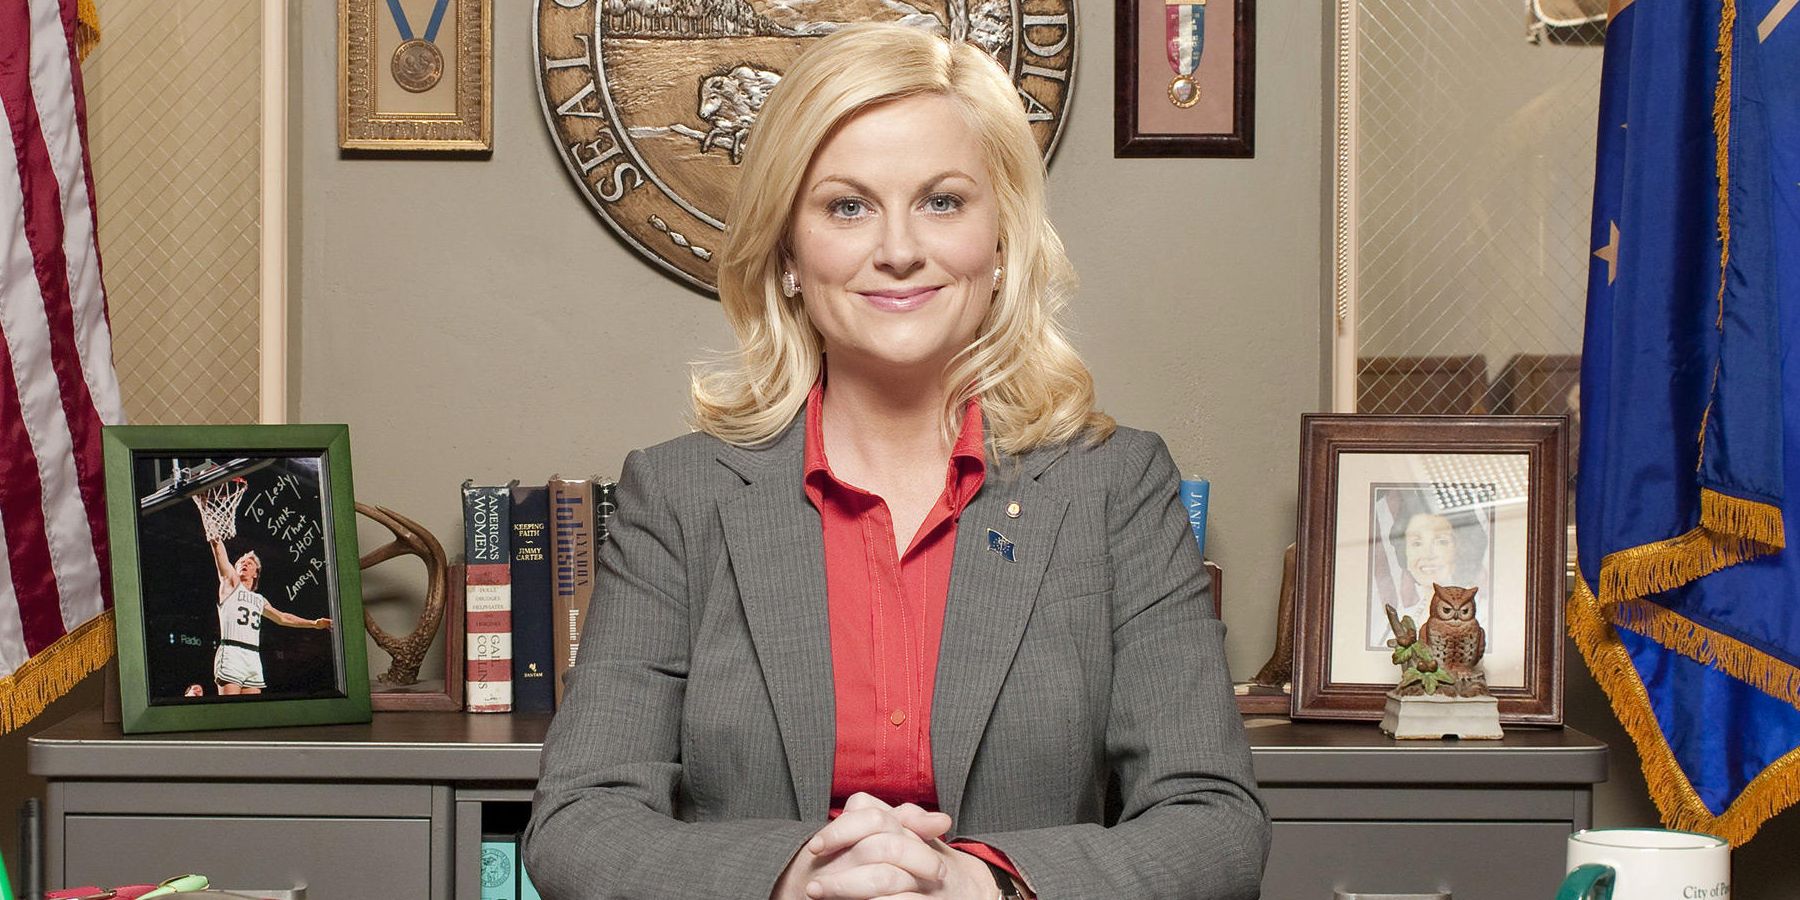 Amy Poehler as Leslie Knope sitting behind her desk and smiling for the camera in Parks and Recreation